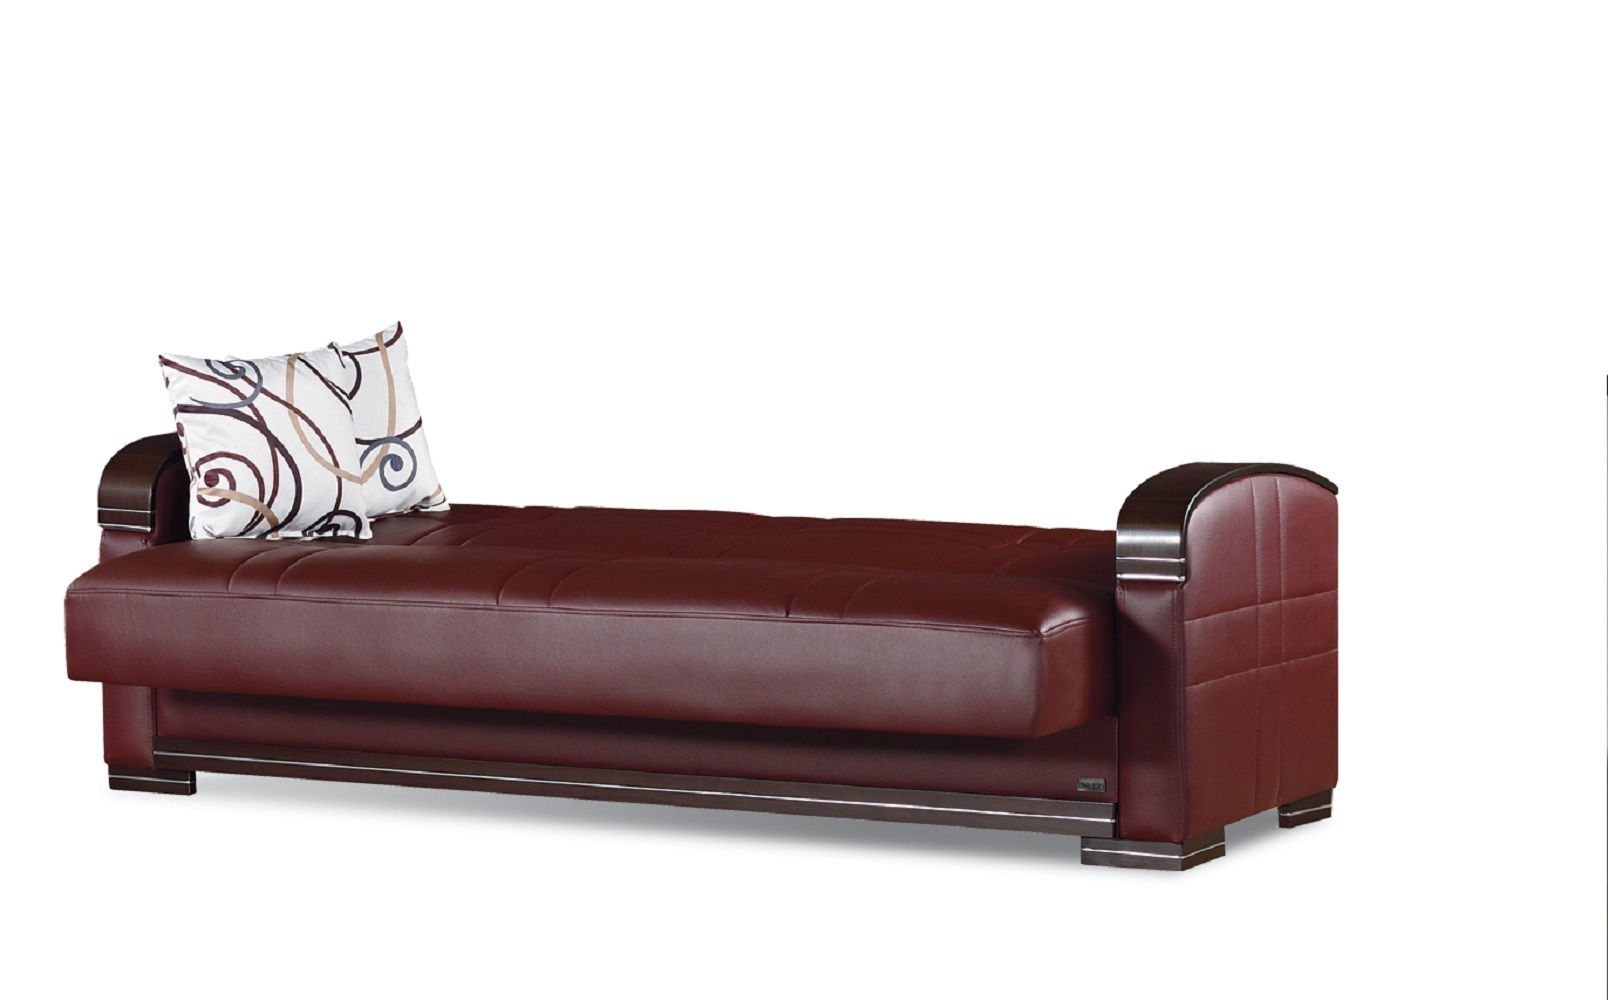 manhattan sofa bed with built-in bluetooth speakers